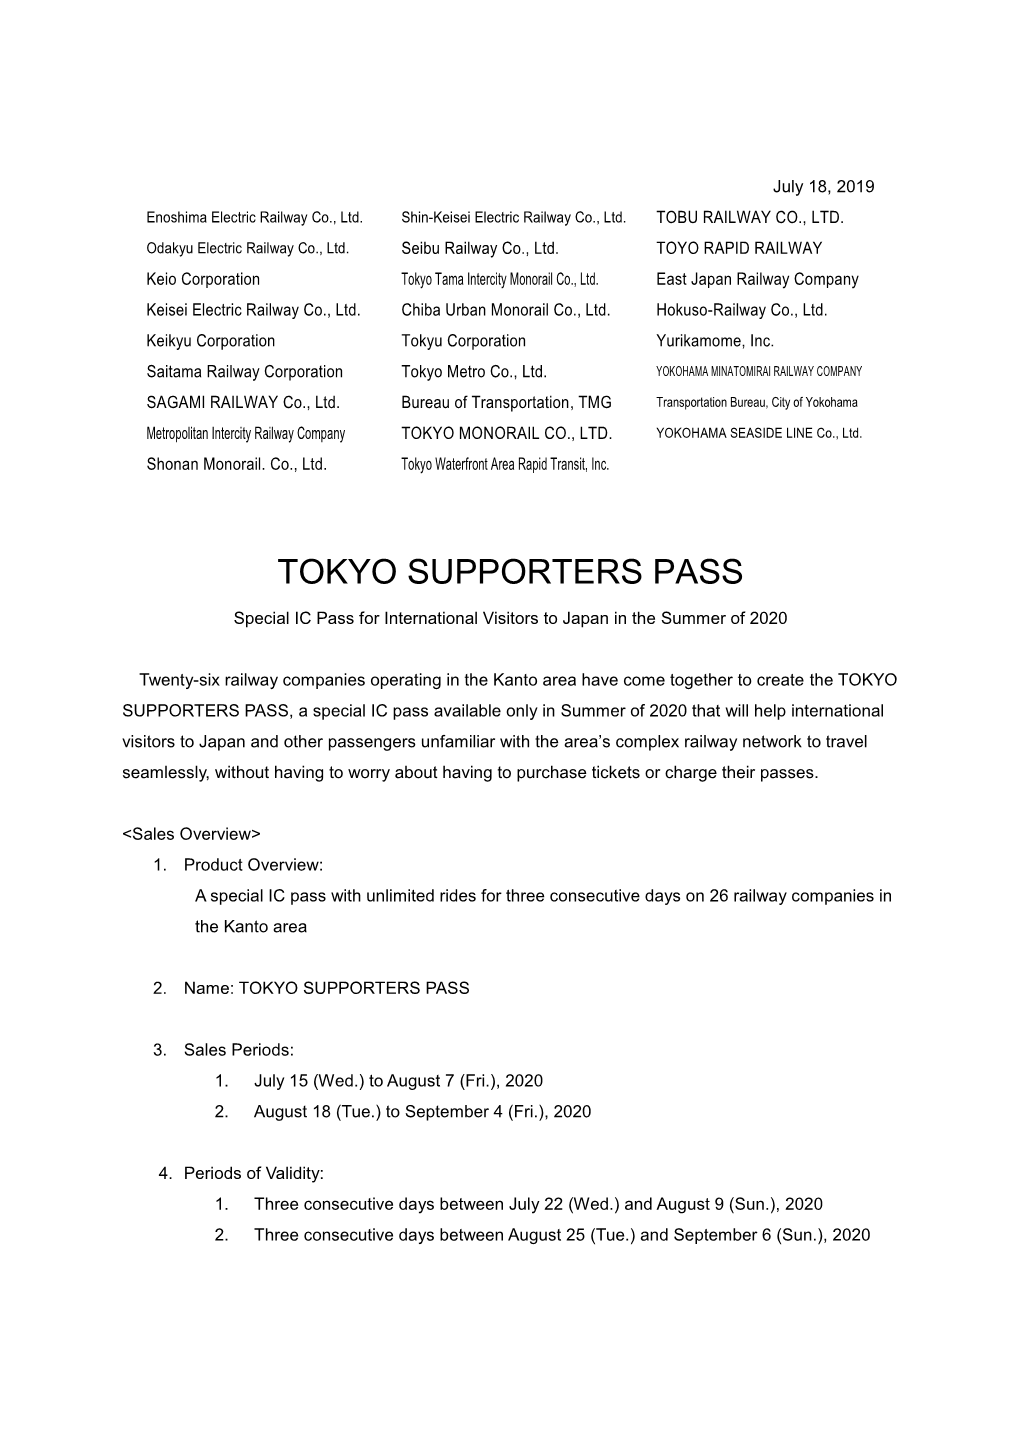 TOKYO SUPPORTERS PASS ～Special IC Pass for International